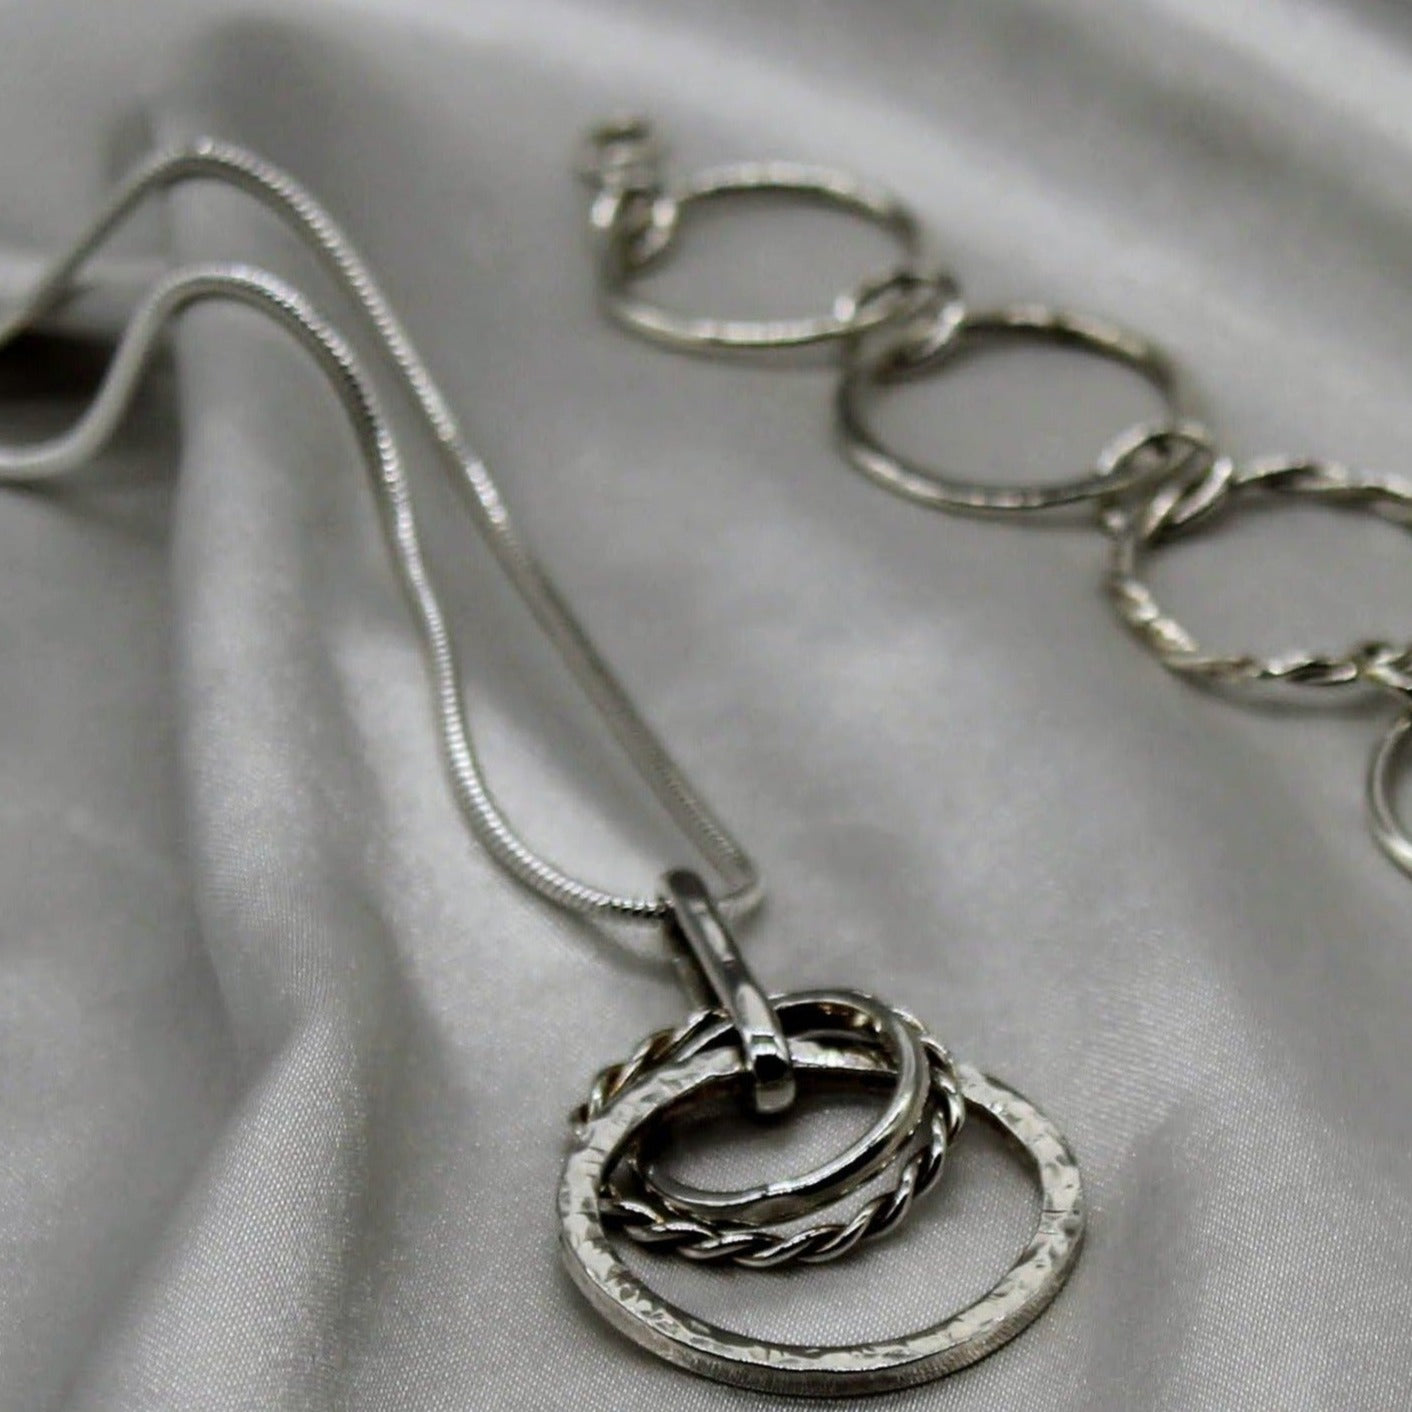 pendant necklace silver three circles various sizes linked together